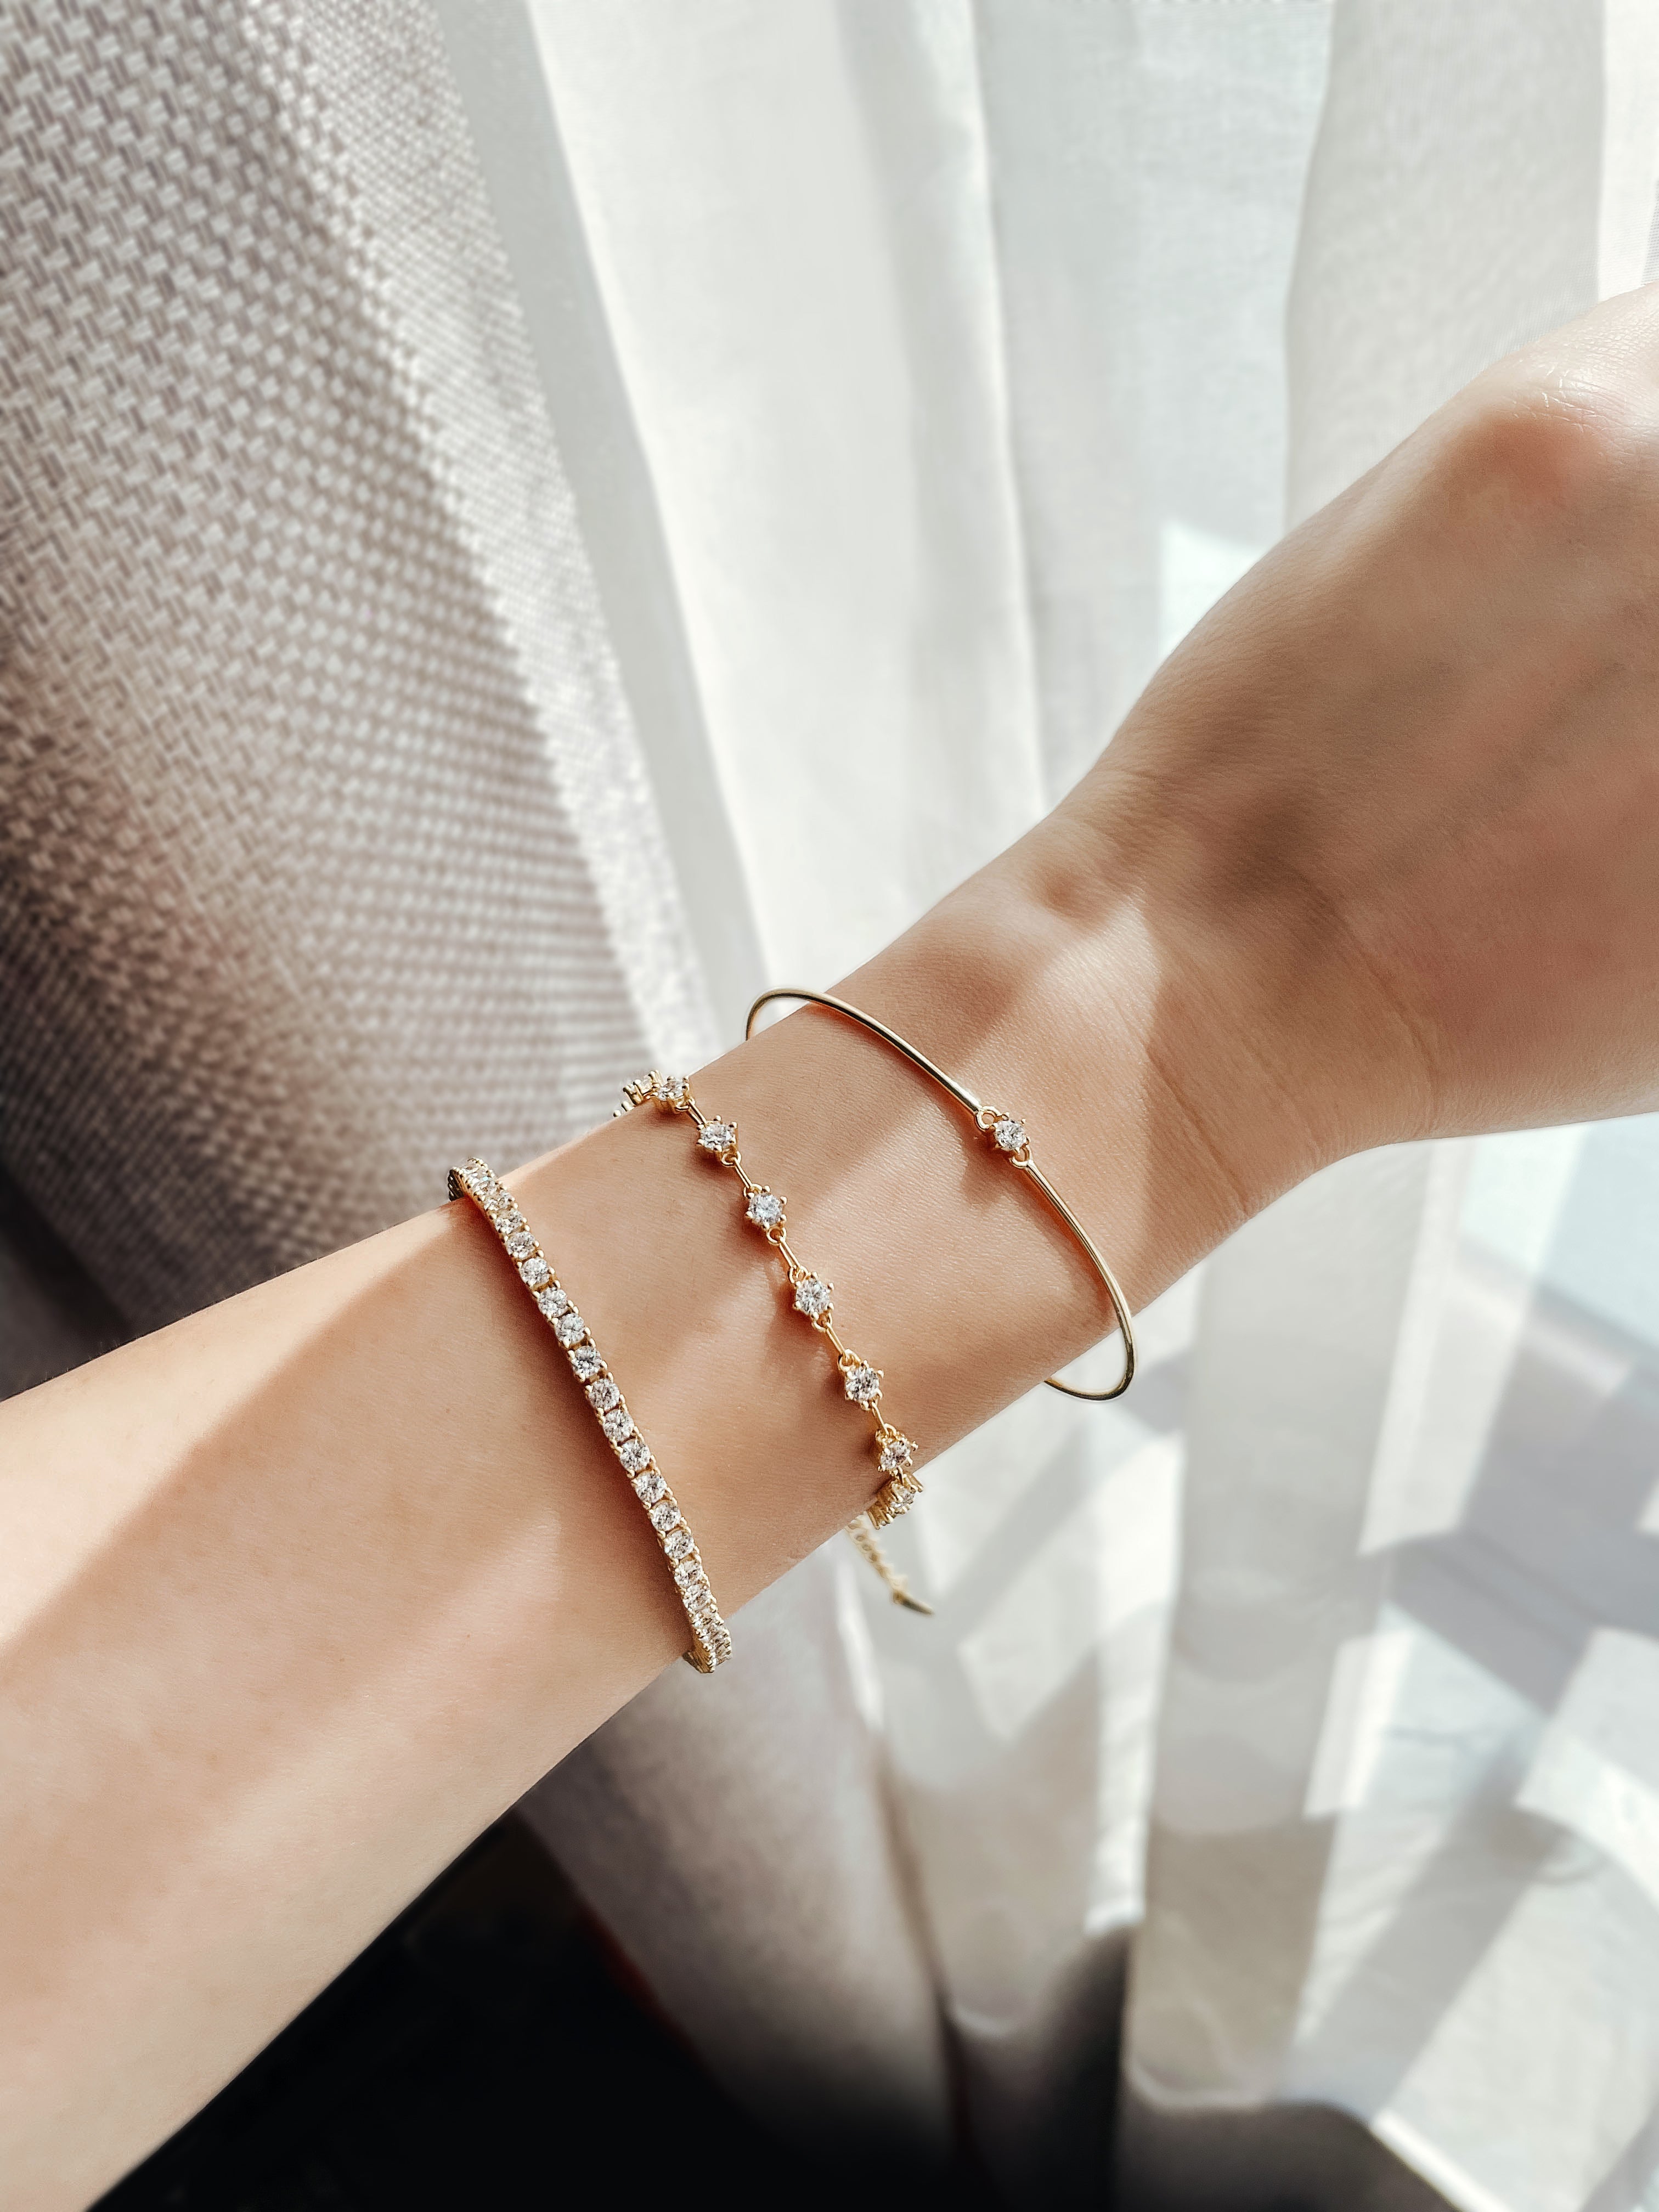 Tender Objects' Tennis Demi Bracelet - A graceful accessory echoing the spirit of the court.